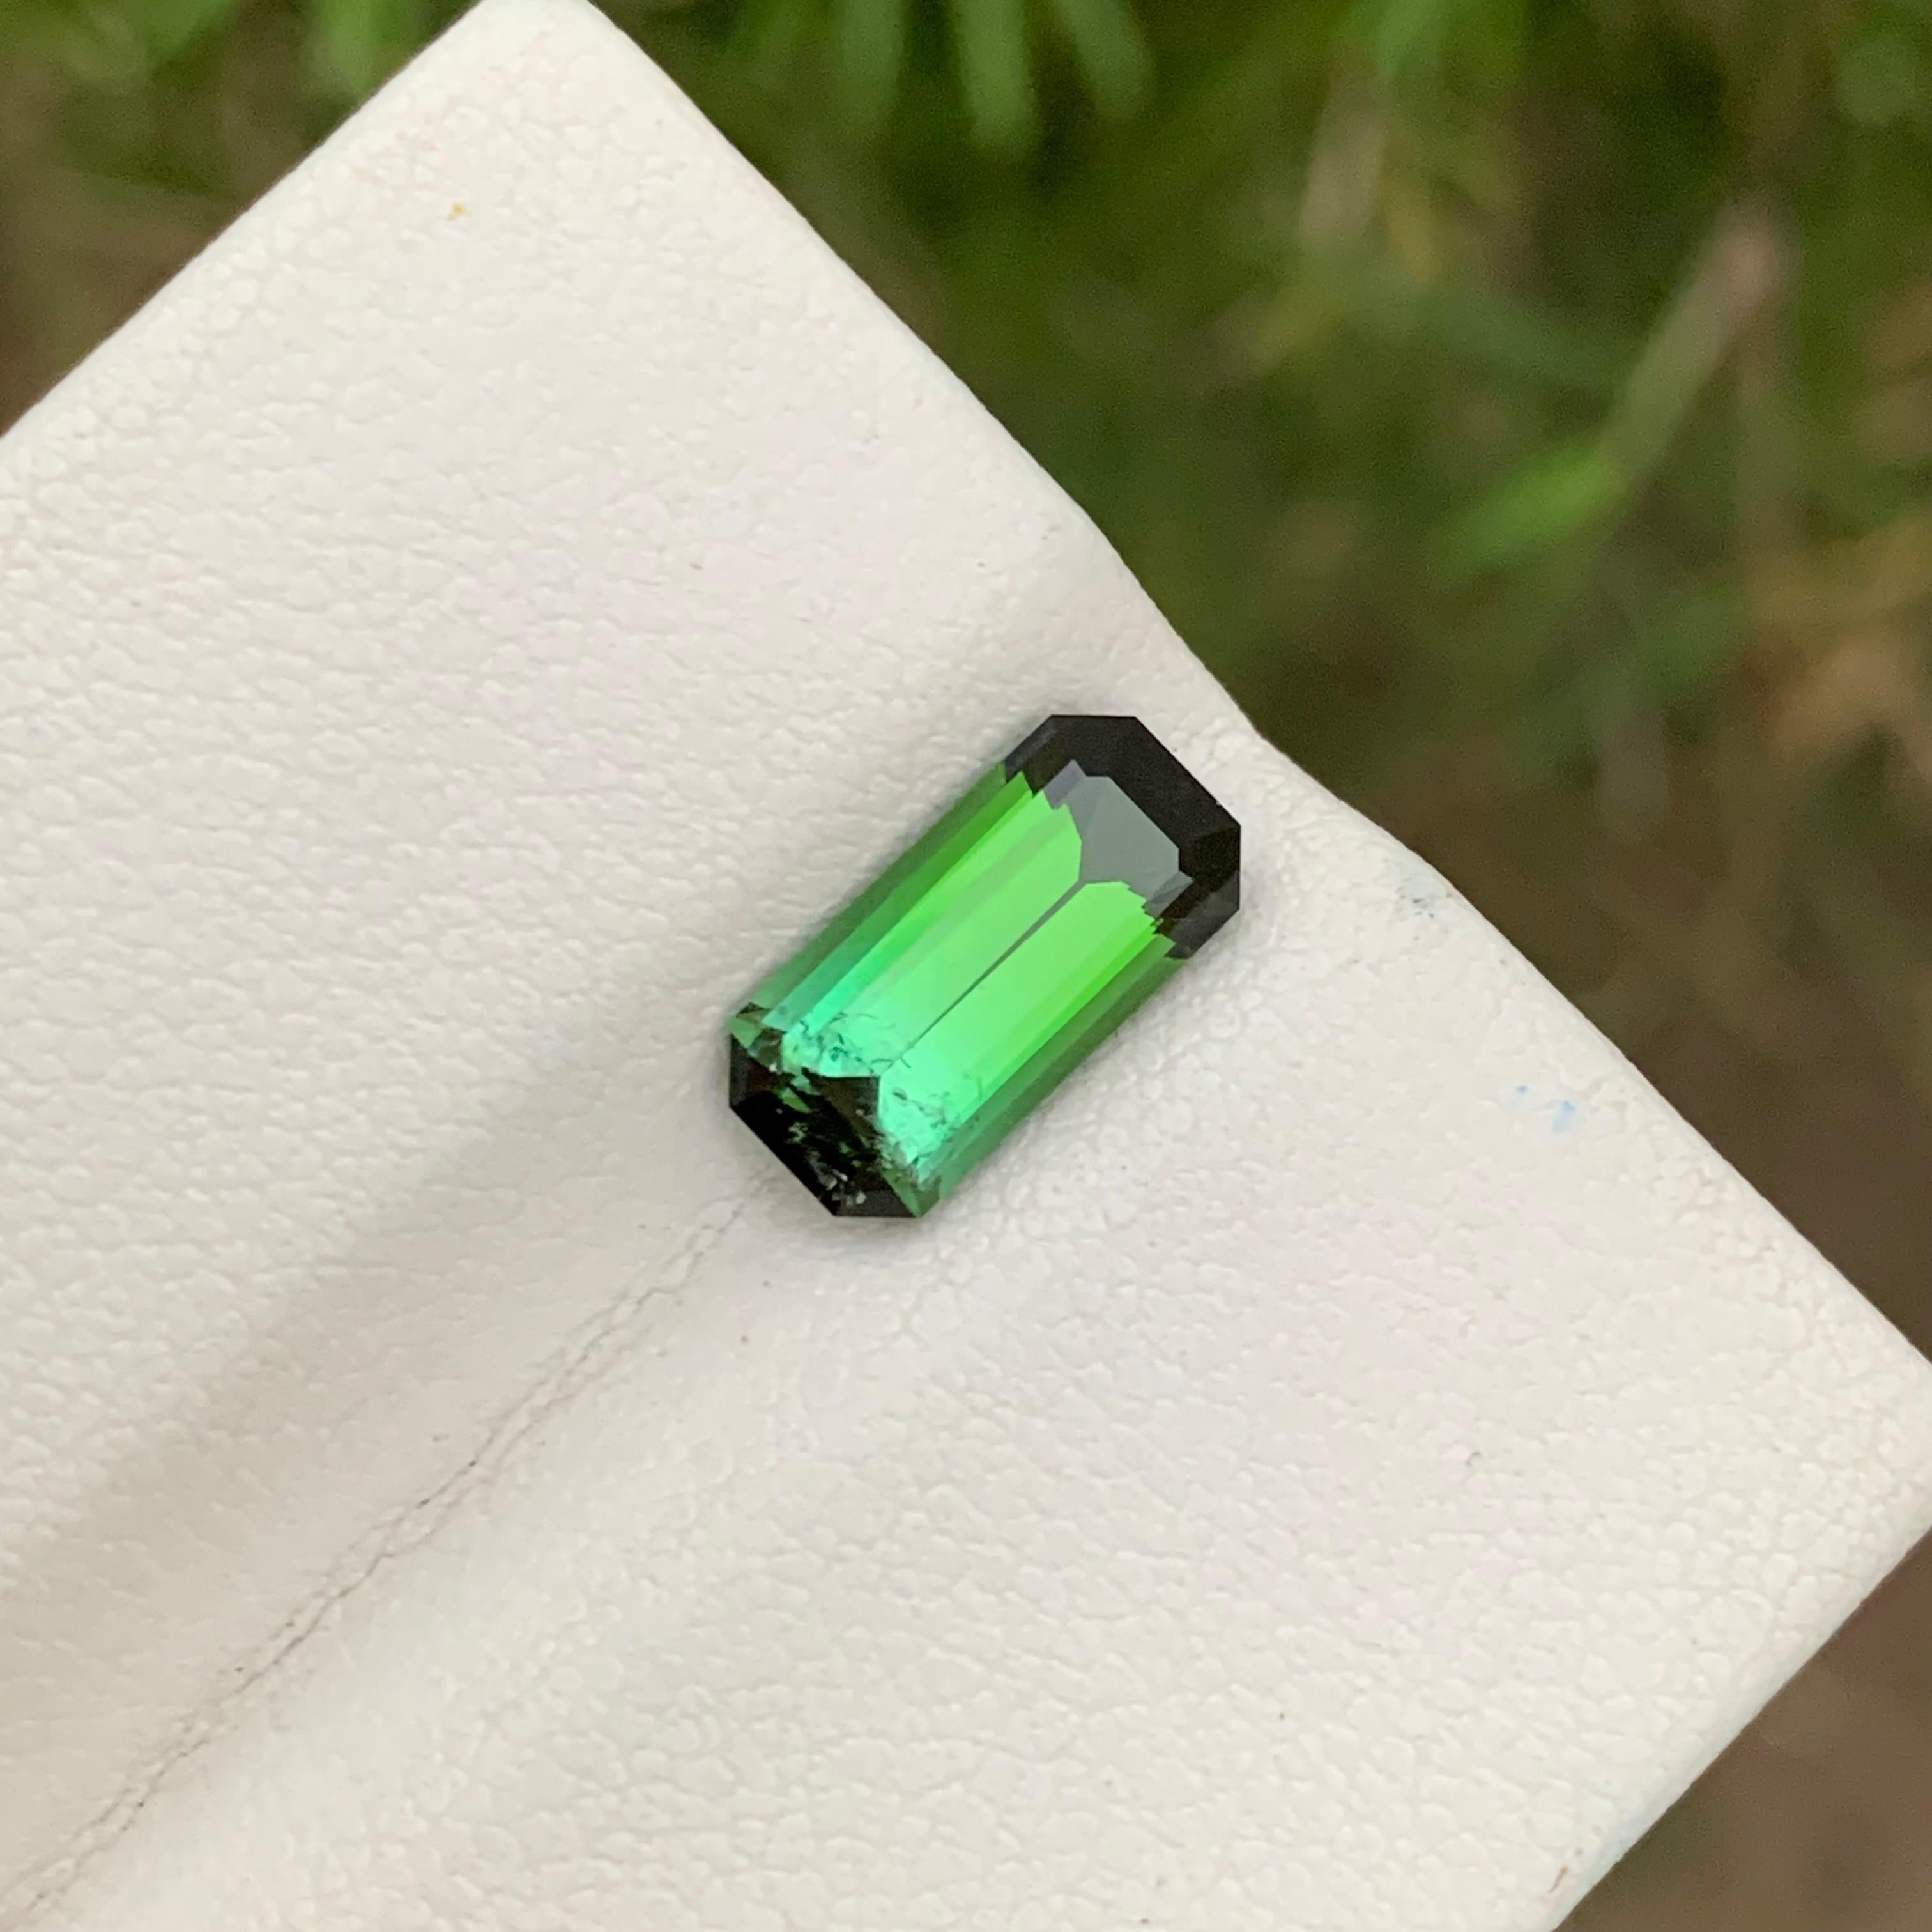 Aesthetic Movement 2.15 Carats Natural Loose Bicolour Tourmaline Emerald Shape Ring Gemstone For Sale